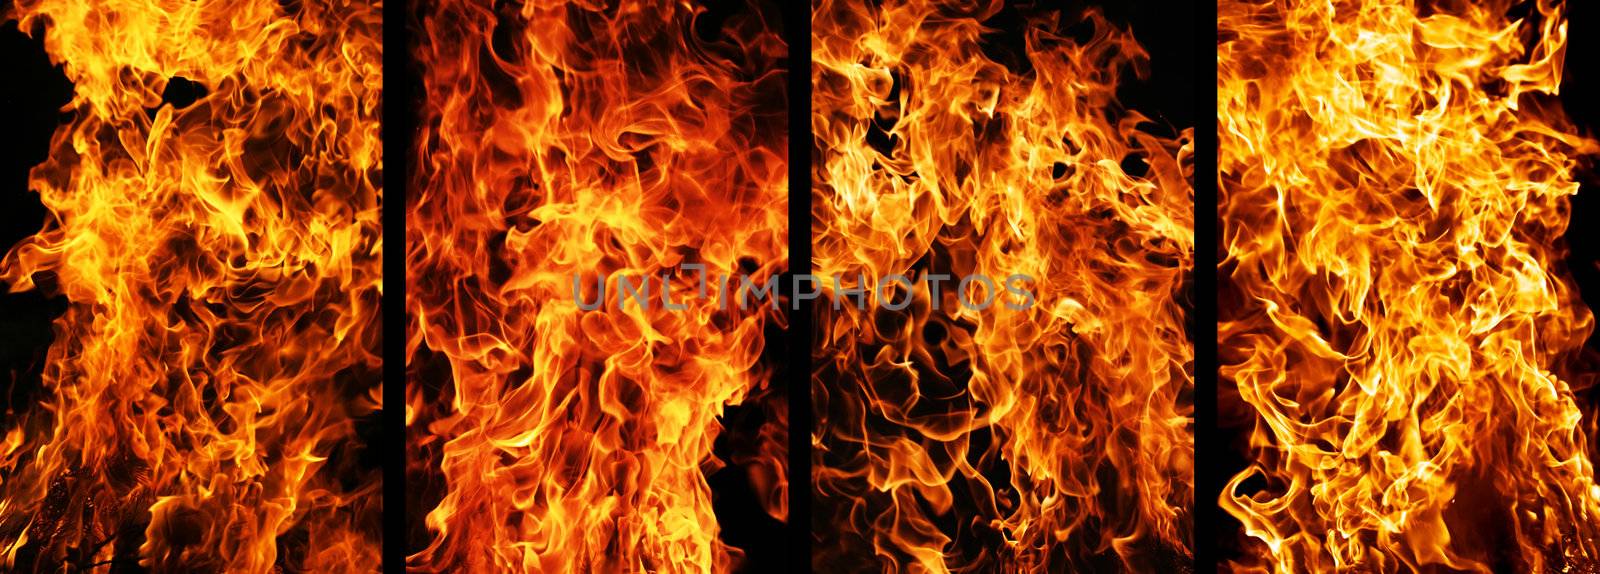 Four types of fire burning on black background